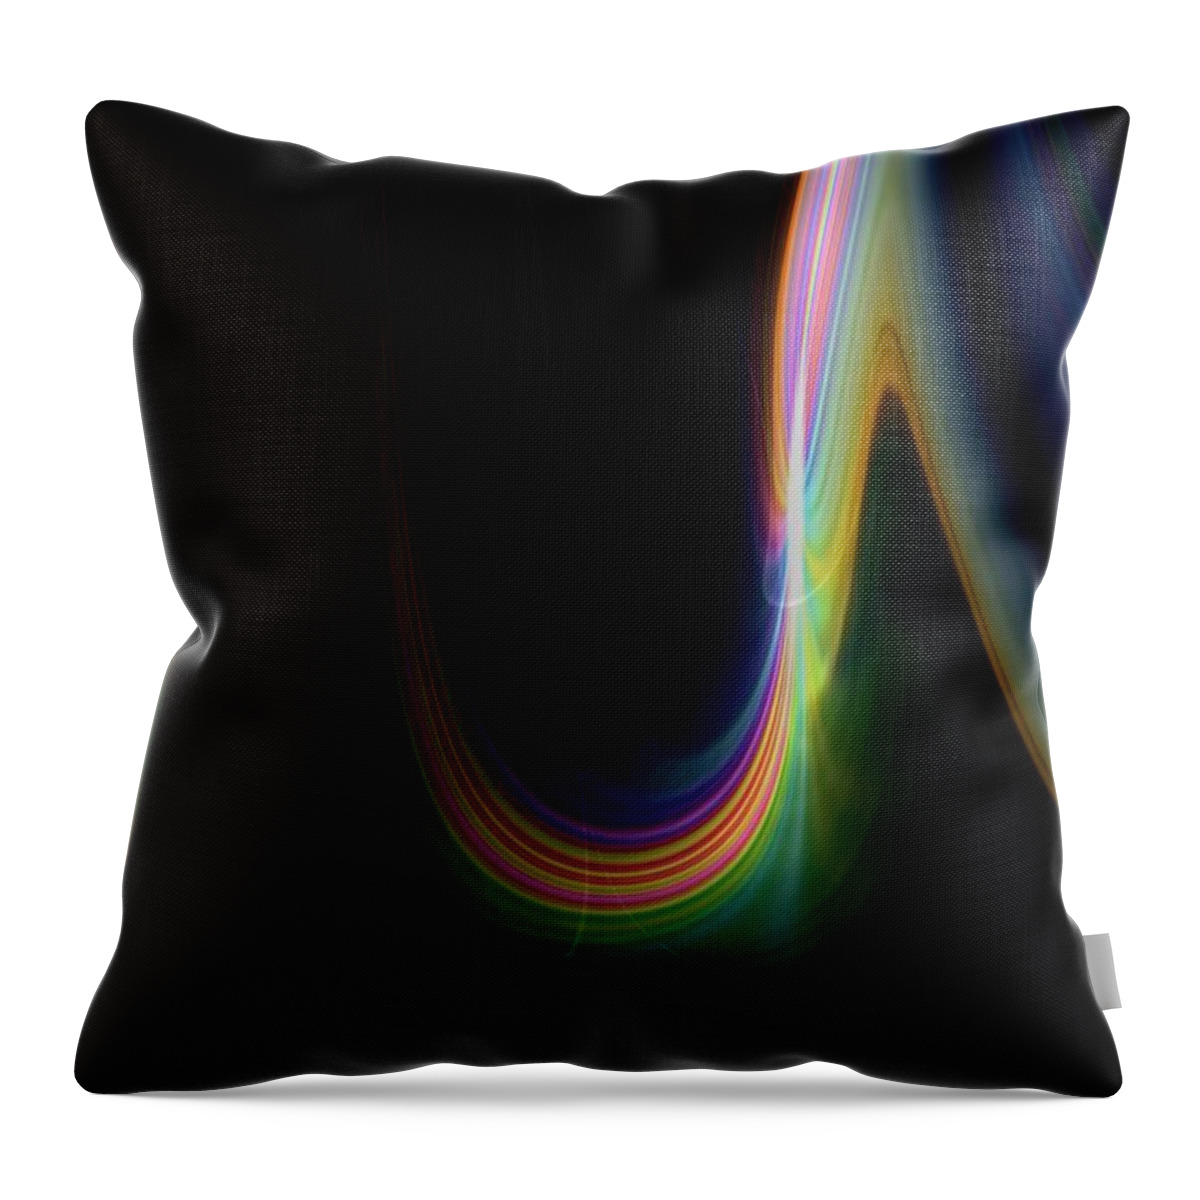 Sunrise Throw Pillow featuring the photograph Sunrise Abstract 3 by Tim Allen